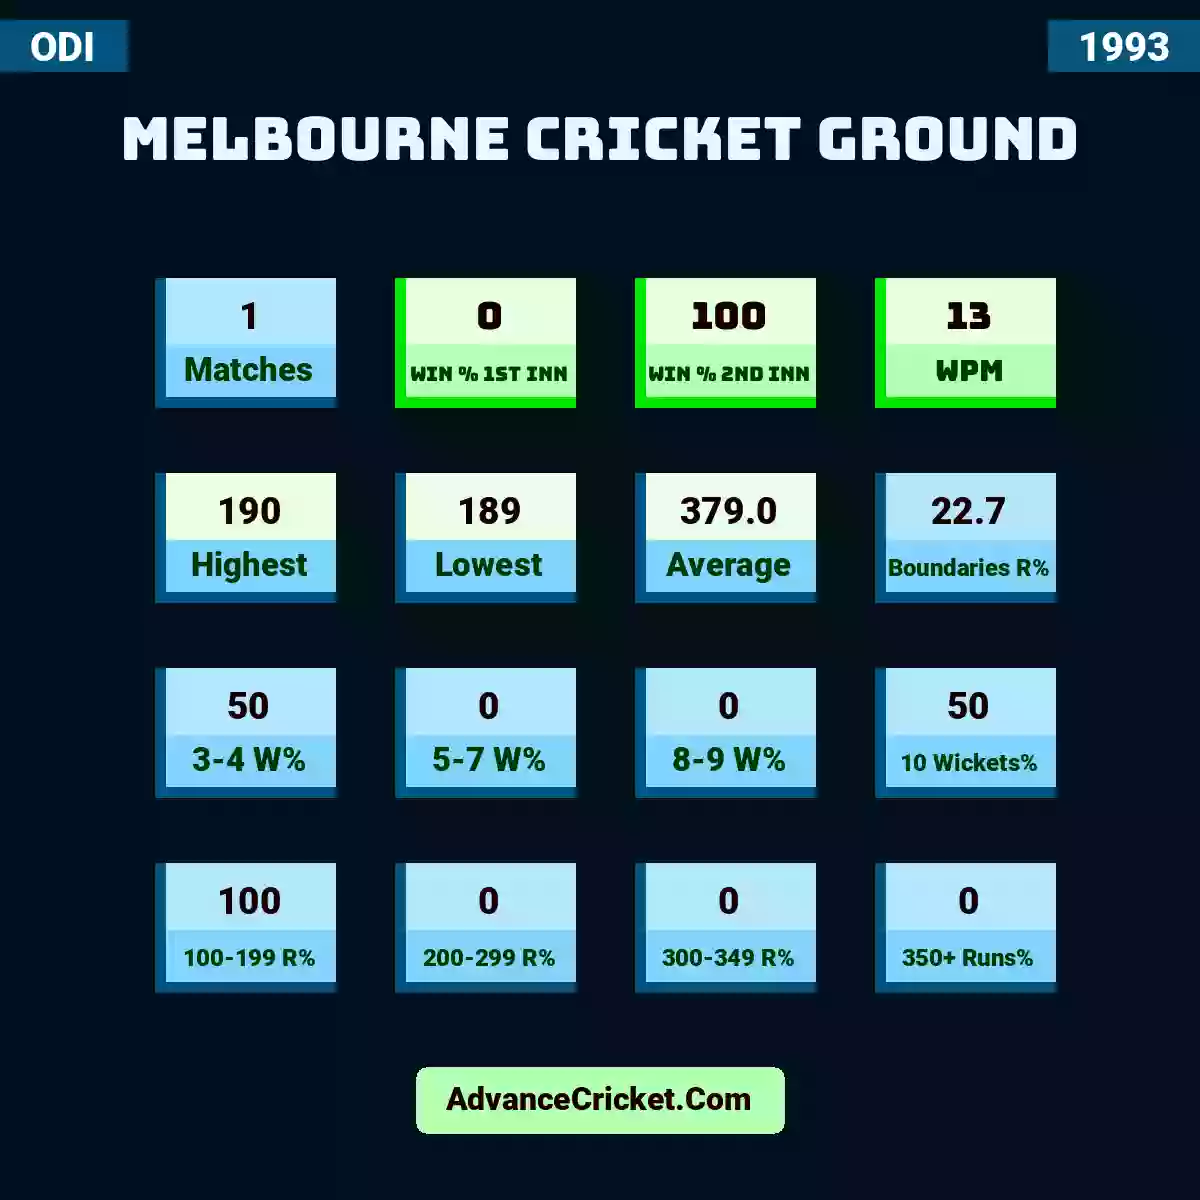 Image showing Melbourne Cricket Ground with Matches: 1, Win % 1st Inn: 0, Win % 2nd Inn: 100, WPM: 13, Highest: 190, Lowest: 189, Average: 379.0, Boundaries R%: 22.7, 3-4 W%: 50, 5-7 W%: 0, 8-9 W%: 0, 10 Wickets%: 50, 100-199 R%: 100, 200-299 R%: 0, 300-349 R%: 0, 350+ Runs%: 0.